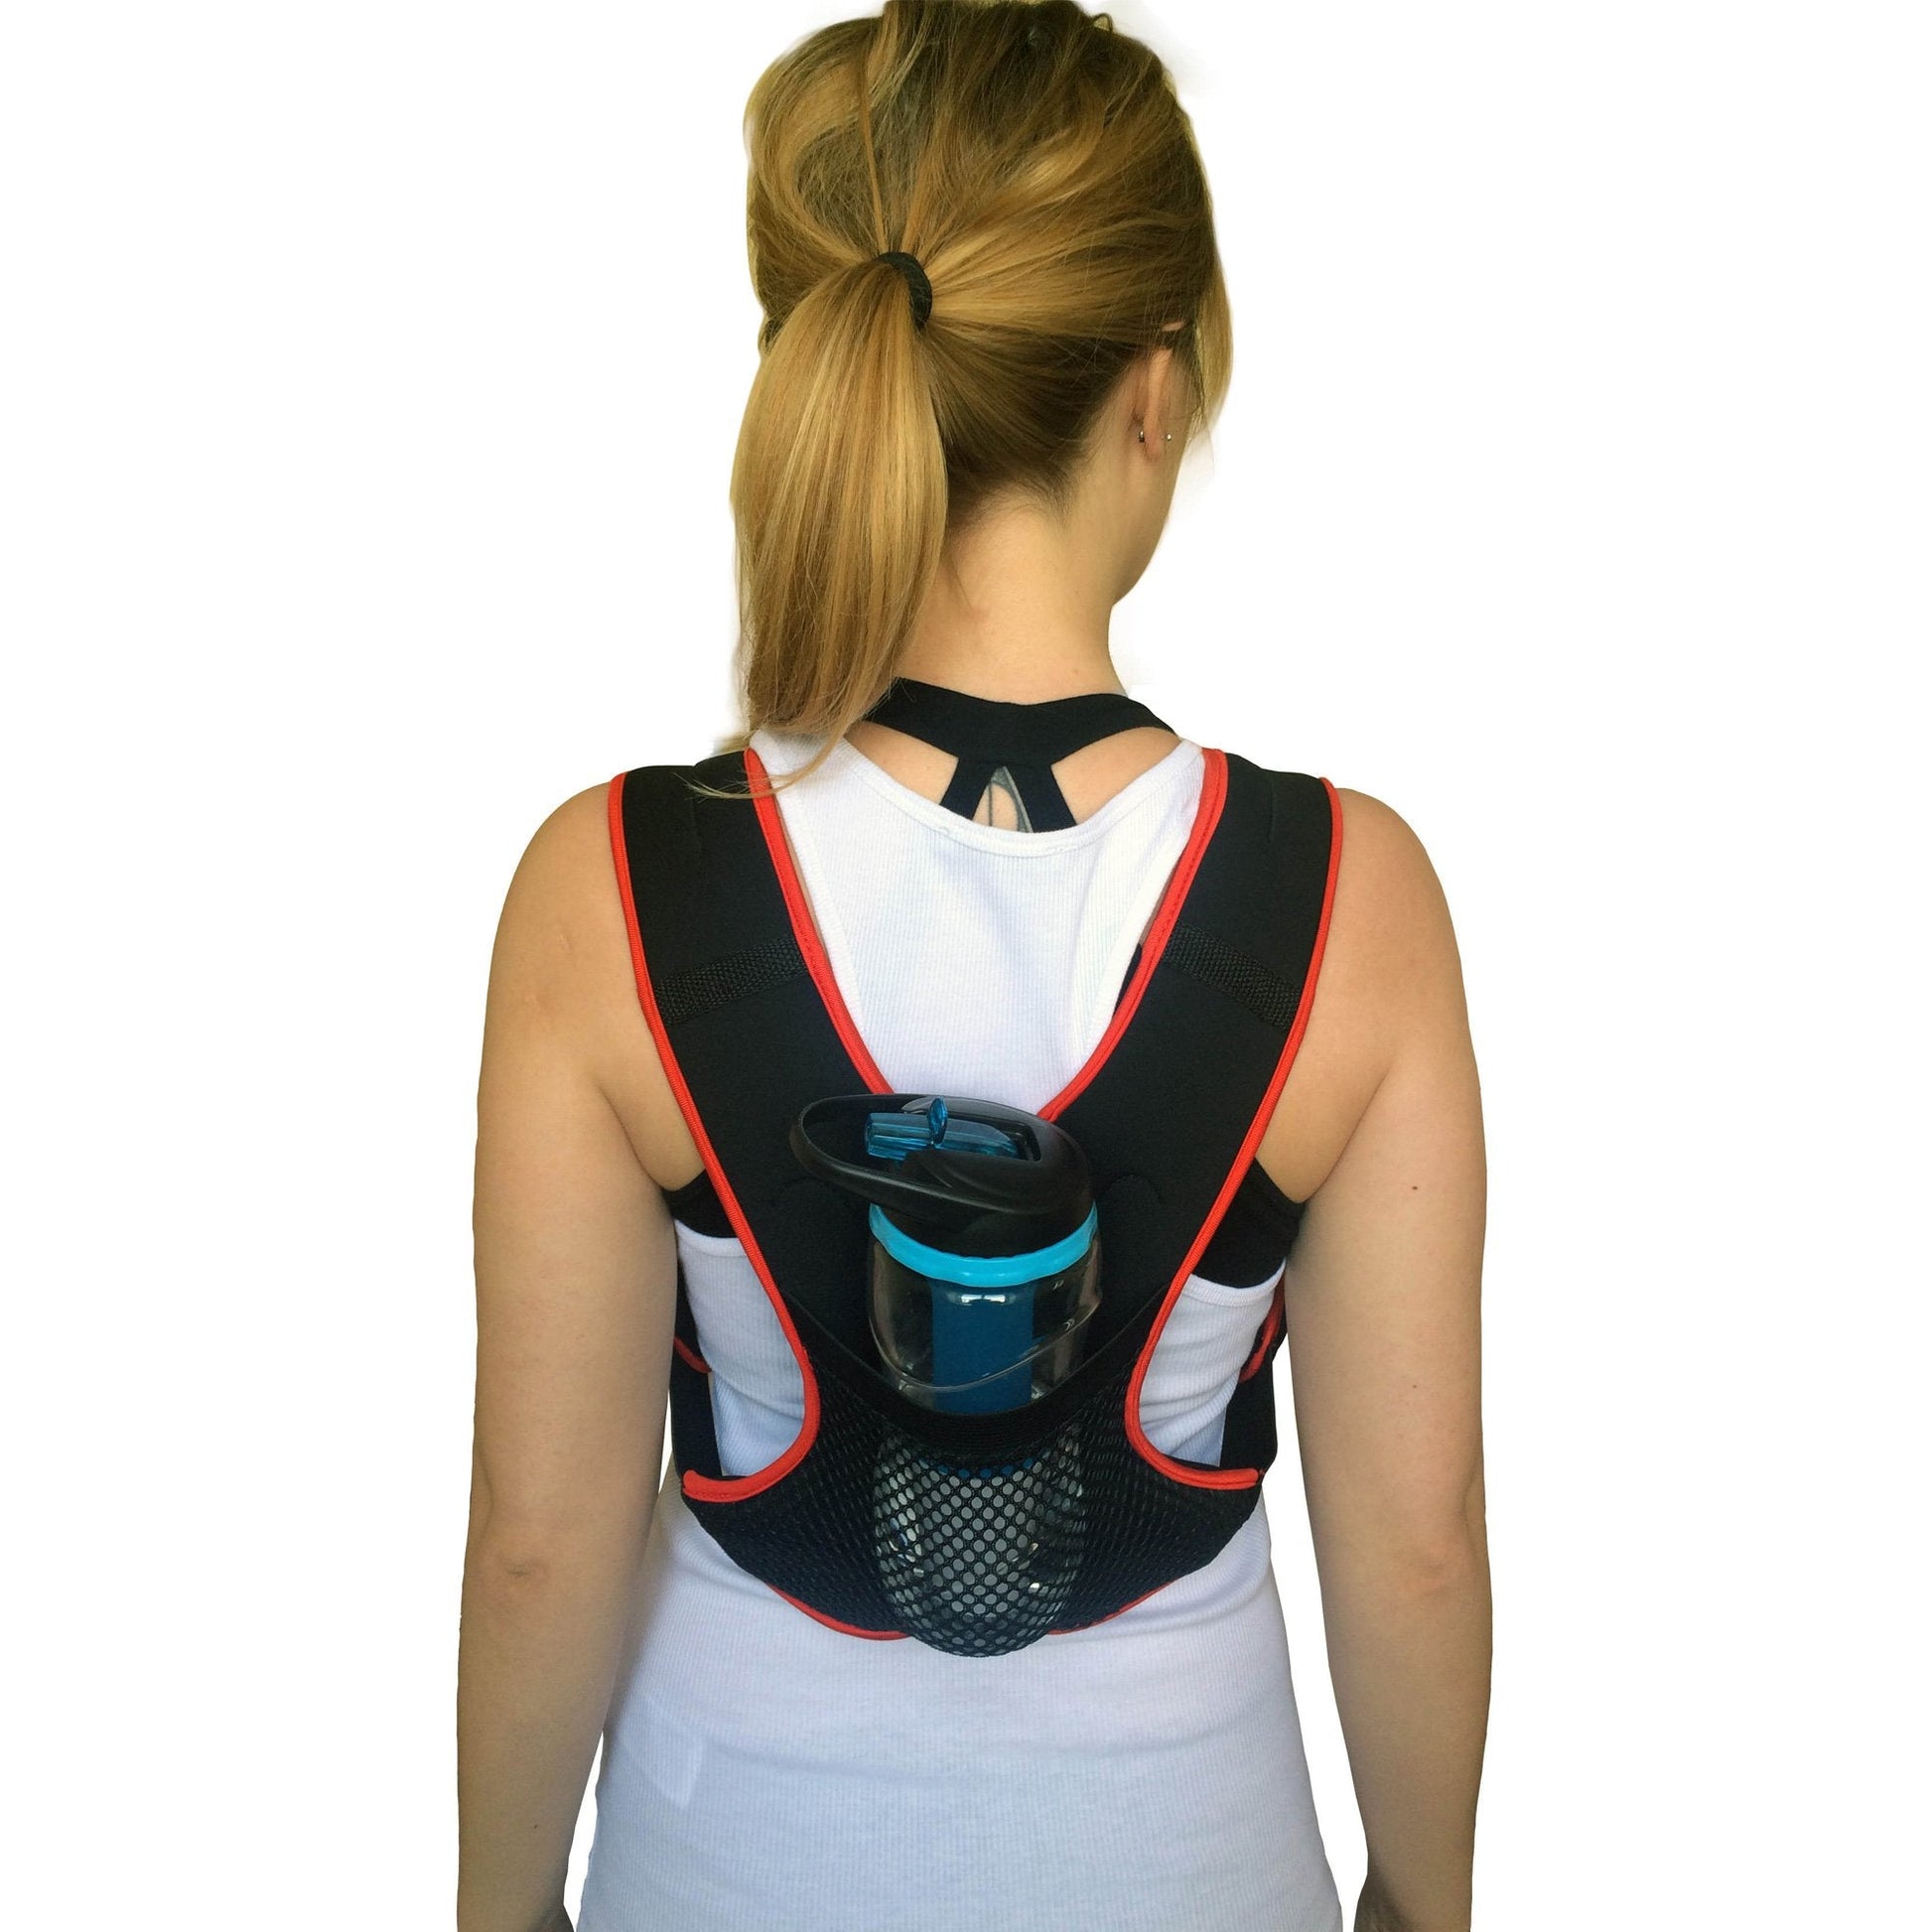 |Viavito 2.5kg Weighted Vest-Back-View|